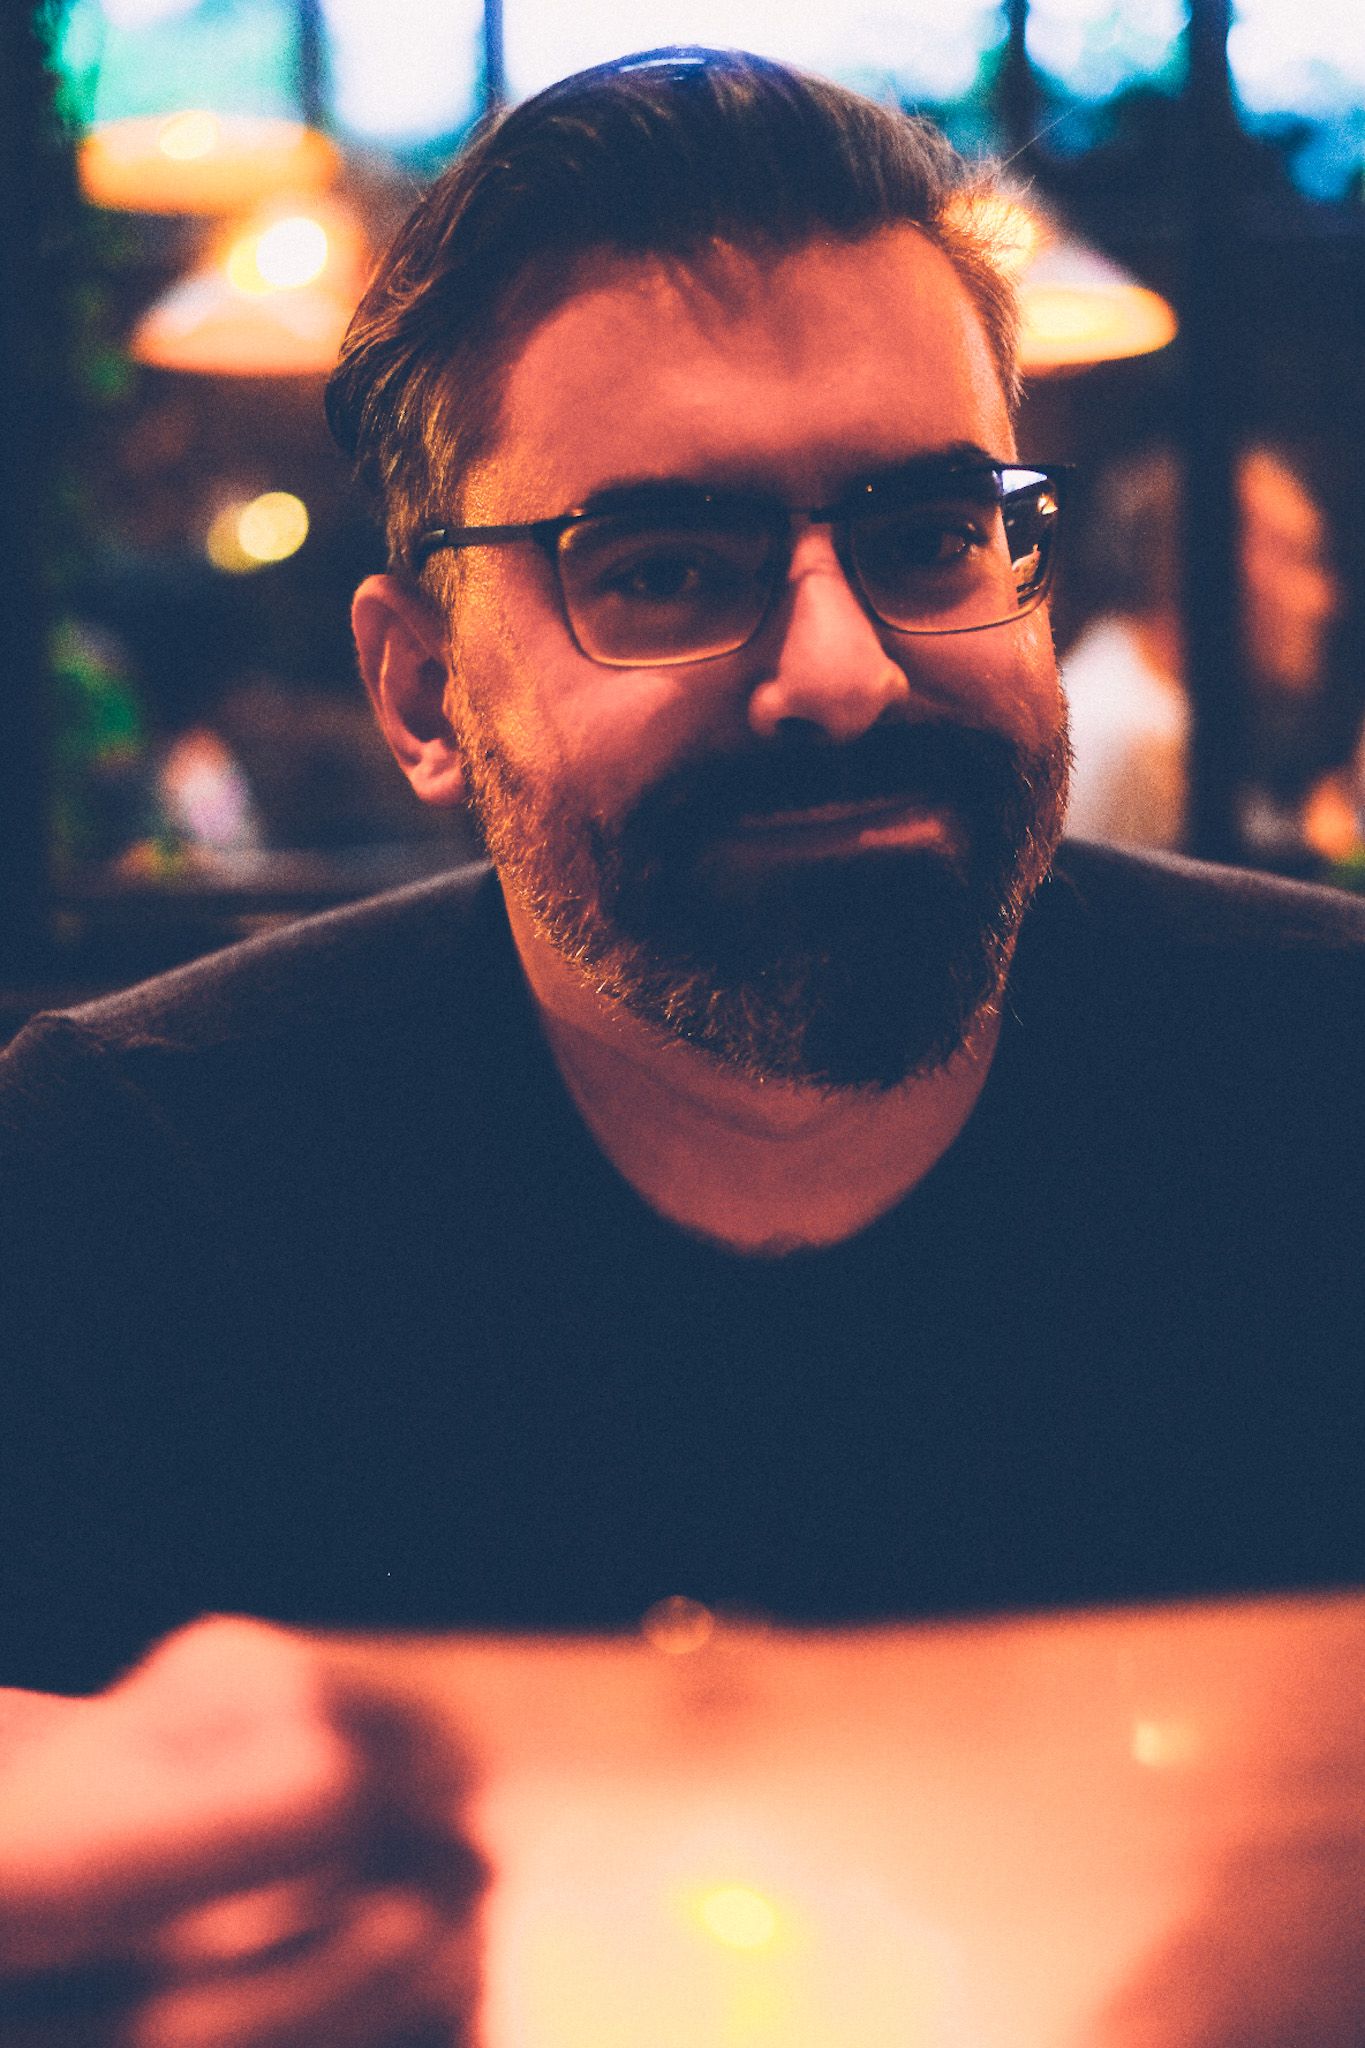 In a dimly lit restaurant, a photo of a bearded man, smiling.